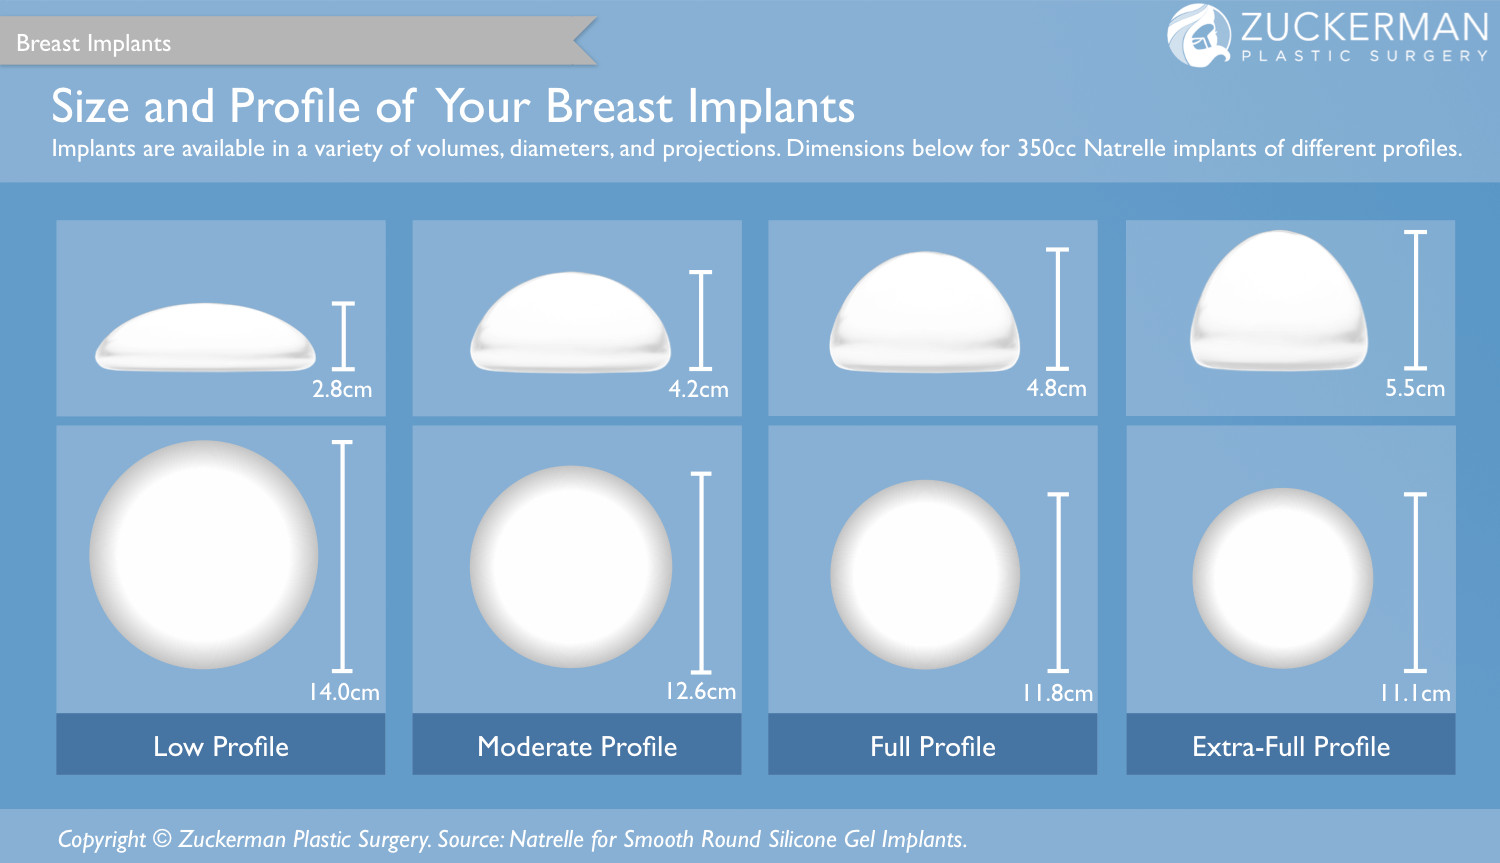 breast implants, size, profile, moderate, full, extra full, low